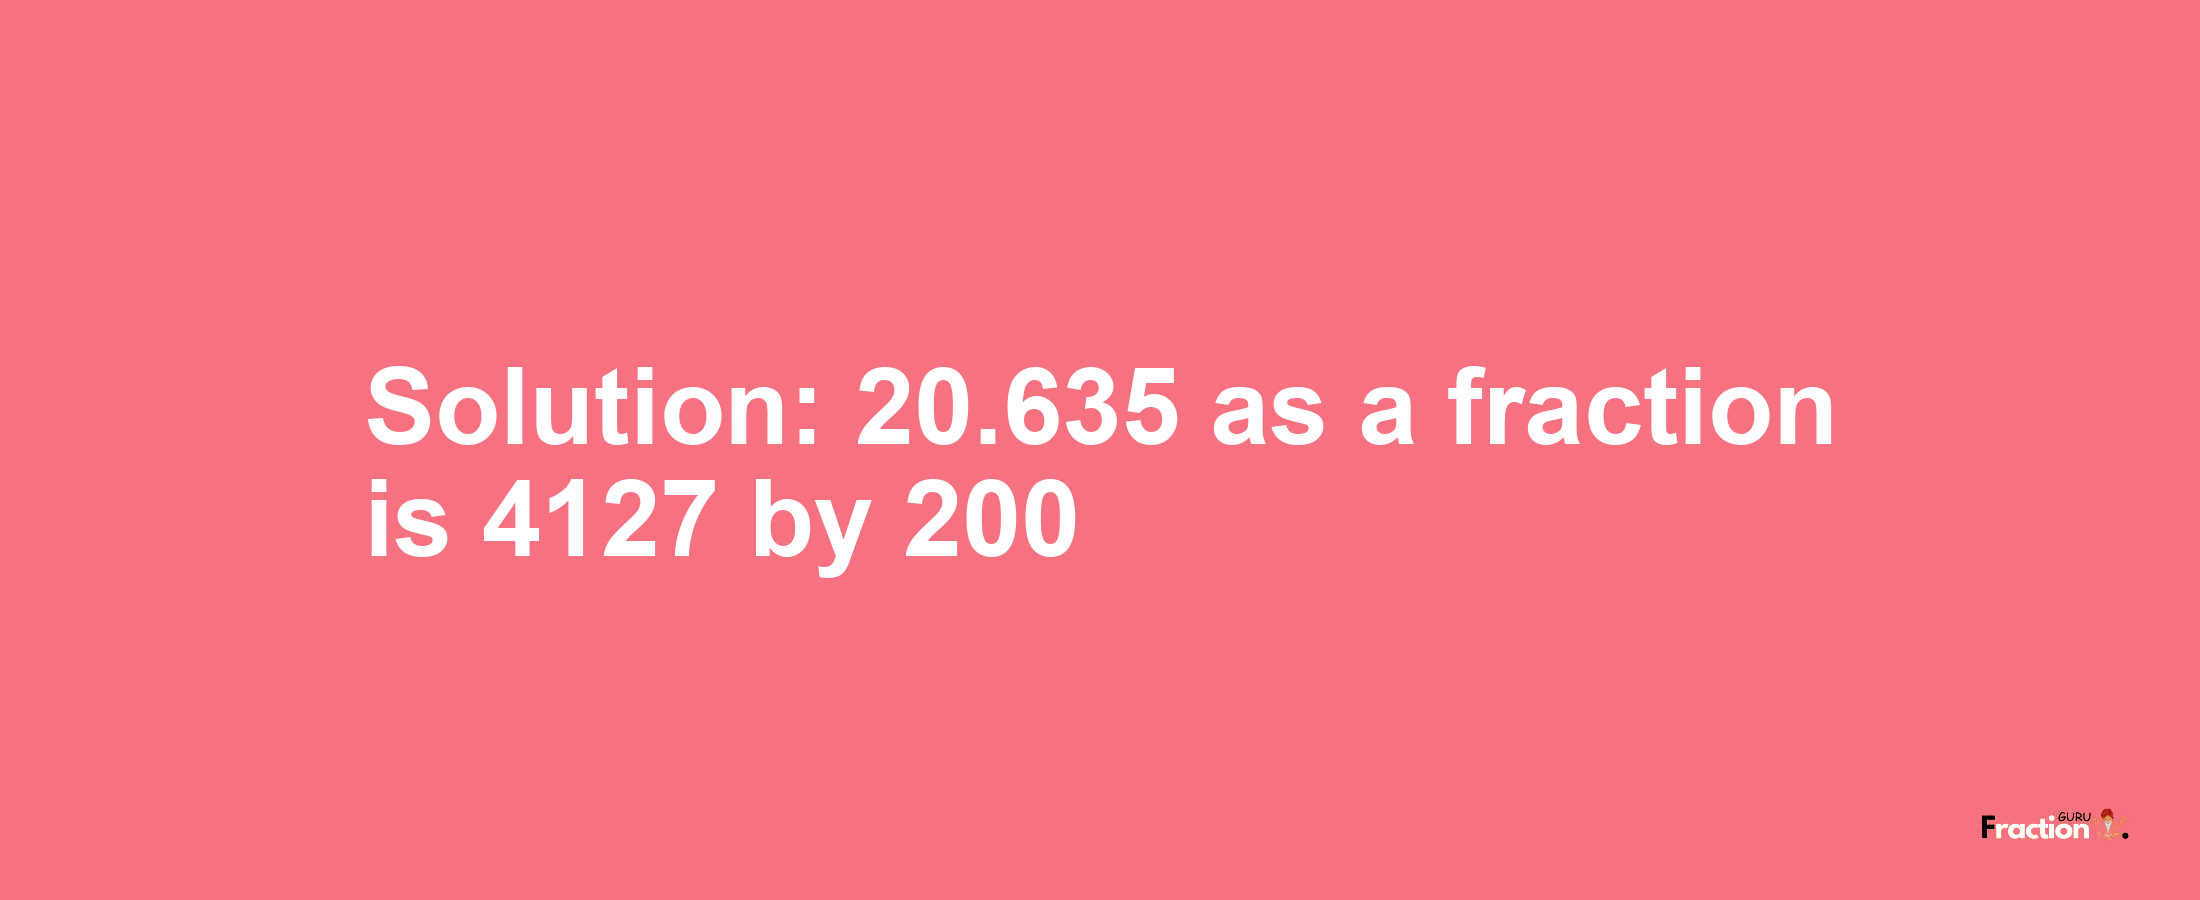 Solution:20.635 as a fraction is 4127/200